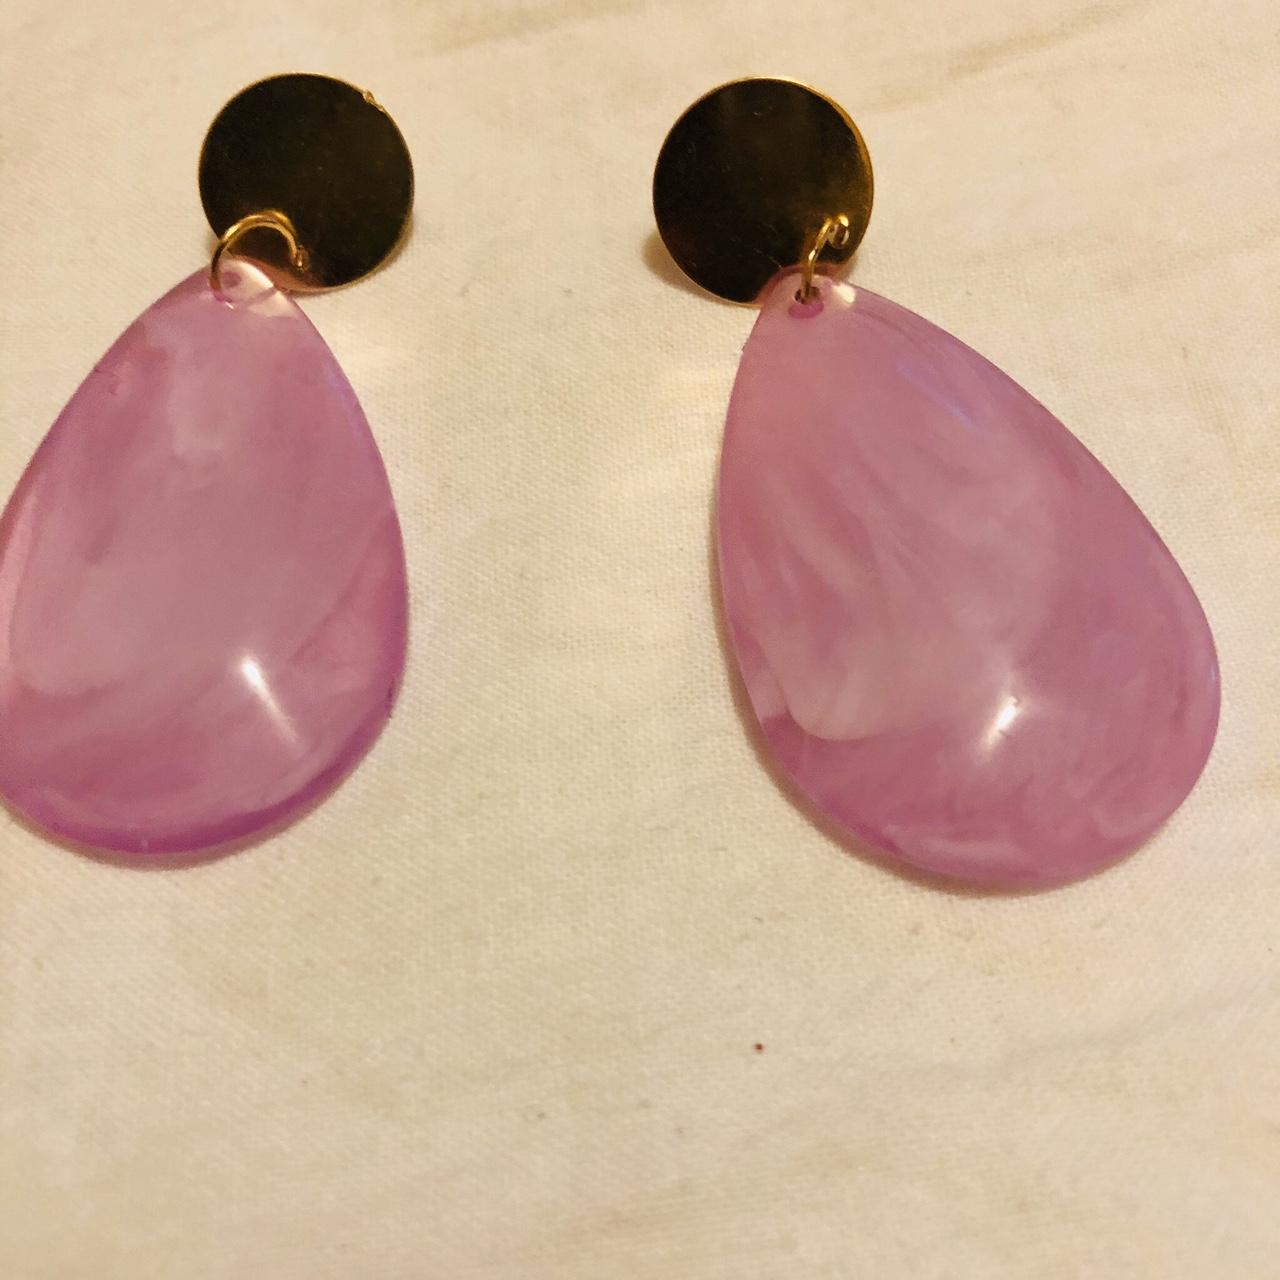 Product Image 2 - Pink glass earrings